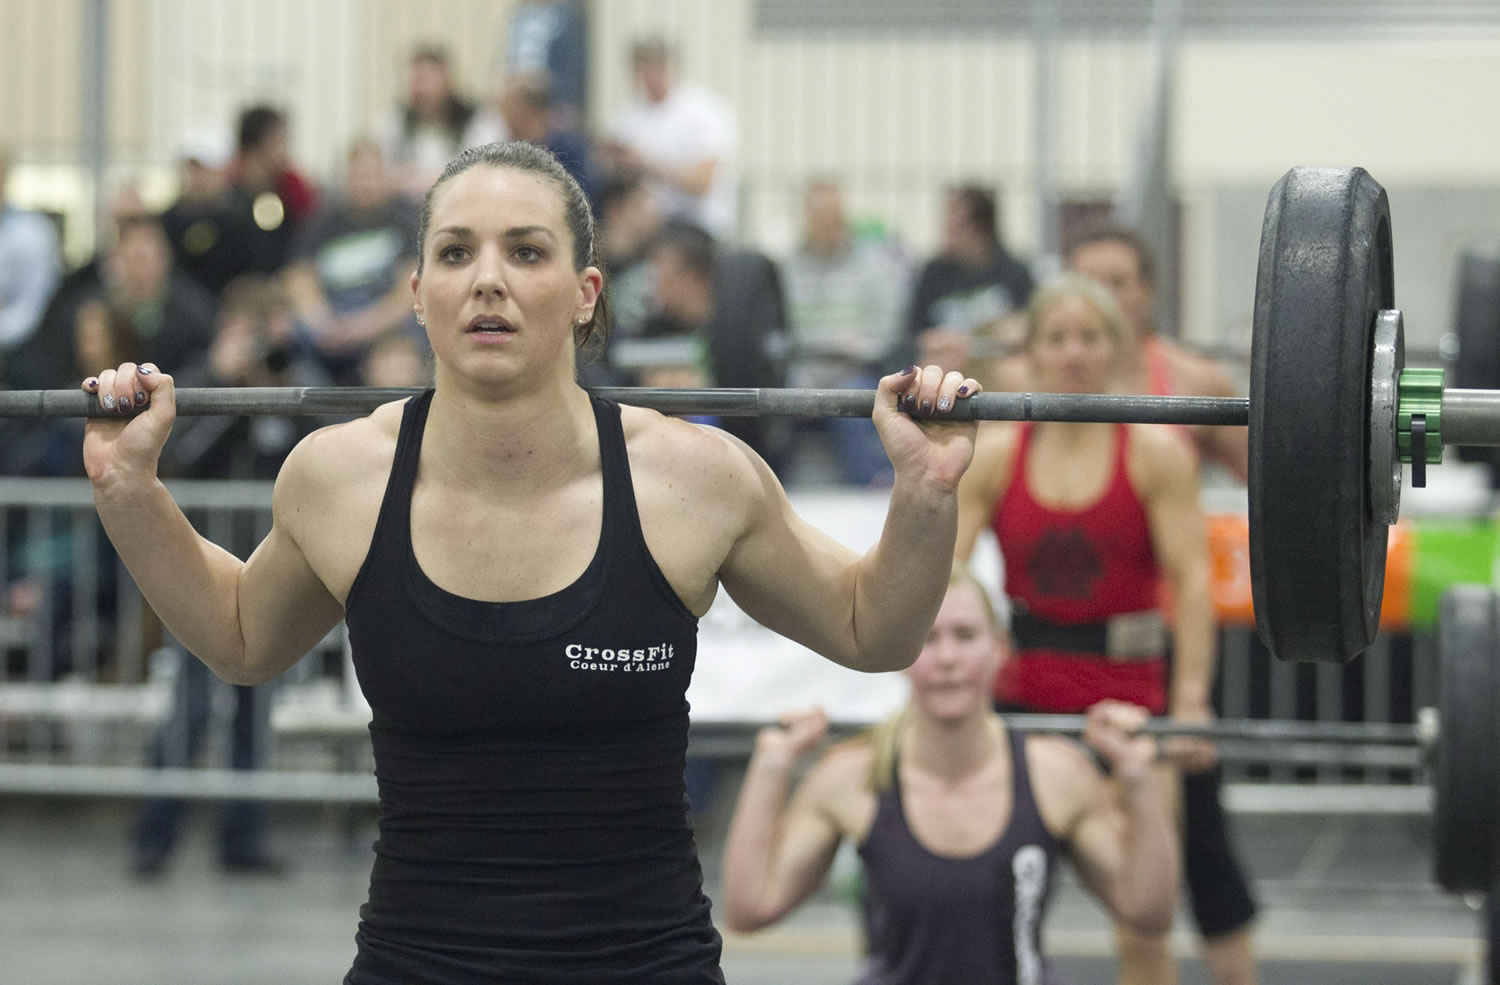 Katie Ziegler competes in the weight lifting event in the 2015 CrossFit Fort Vancouver Invitational. The event will be returning to the Clark County Event Center in Ridgefield in January 2016.